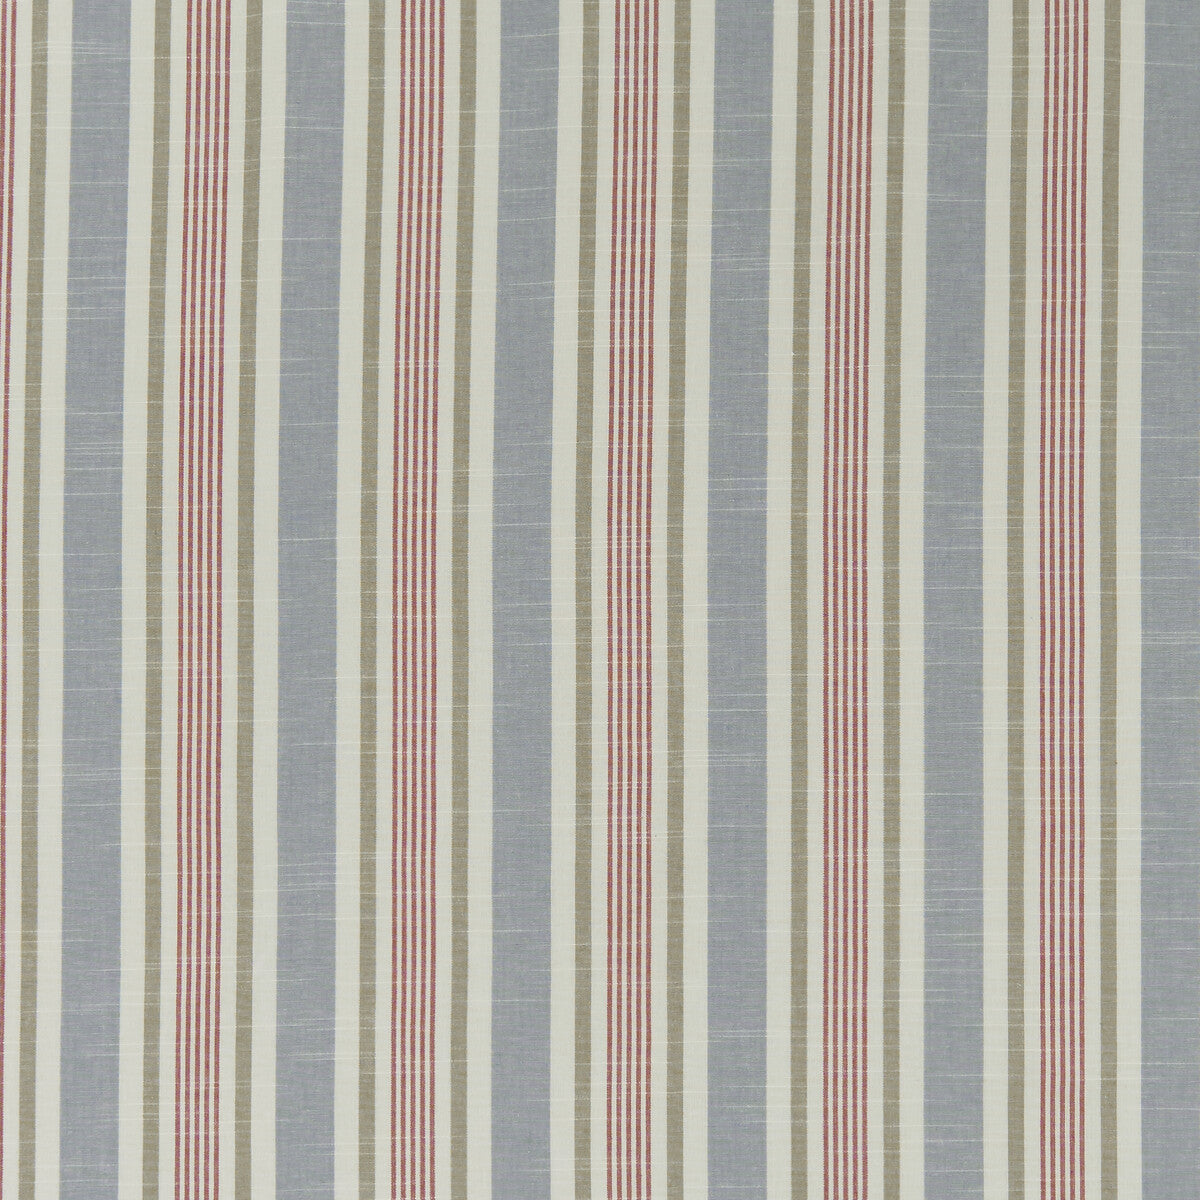 Mappleton fabric in denim/red color - pattern F1310/04.CAC.0 - by Clarke And Clarke in the Bempton By Studio G For C&amp;C collection